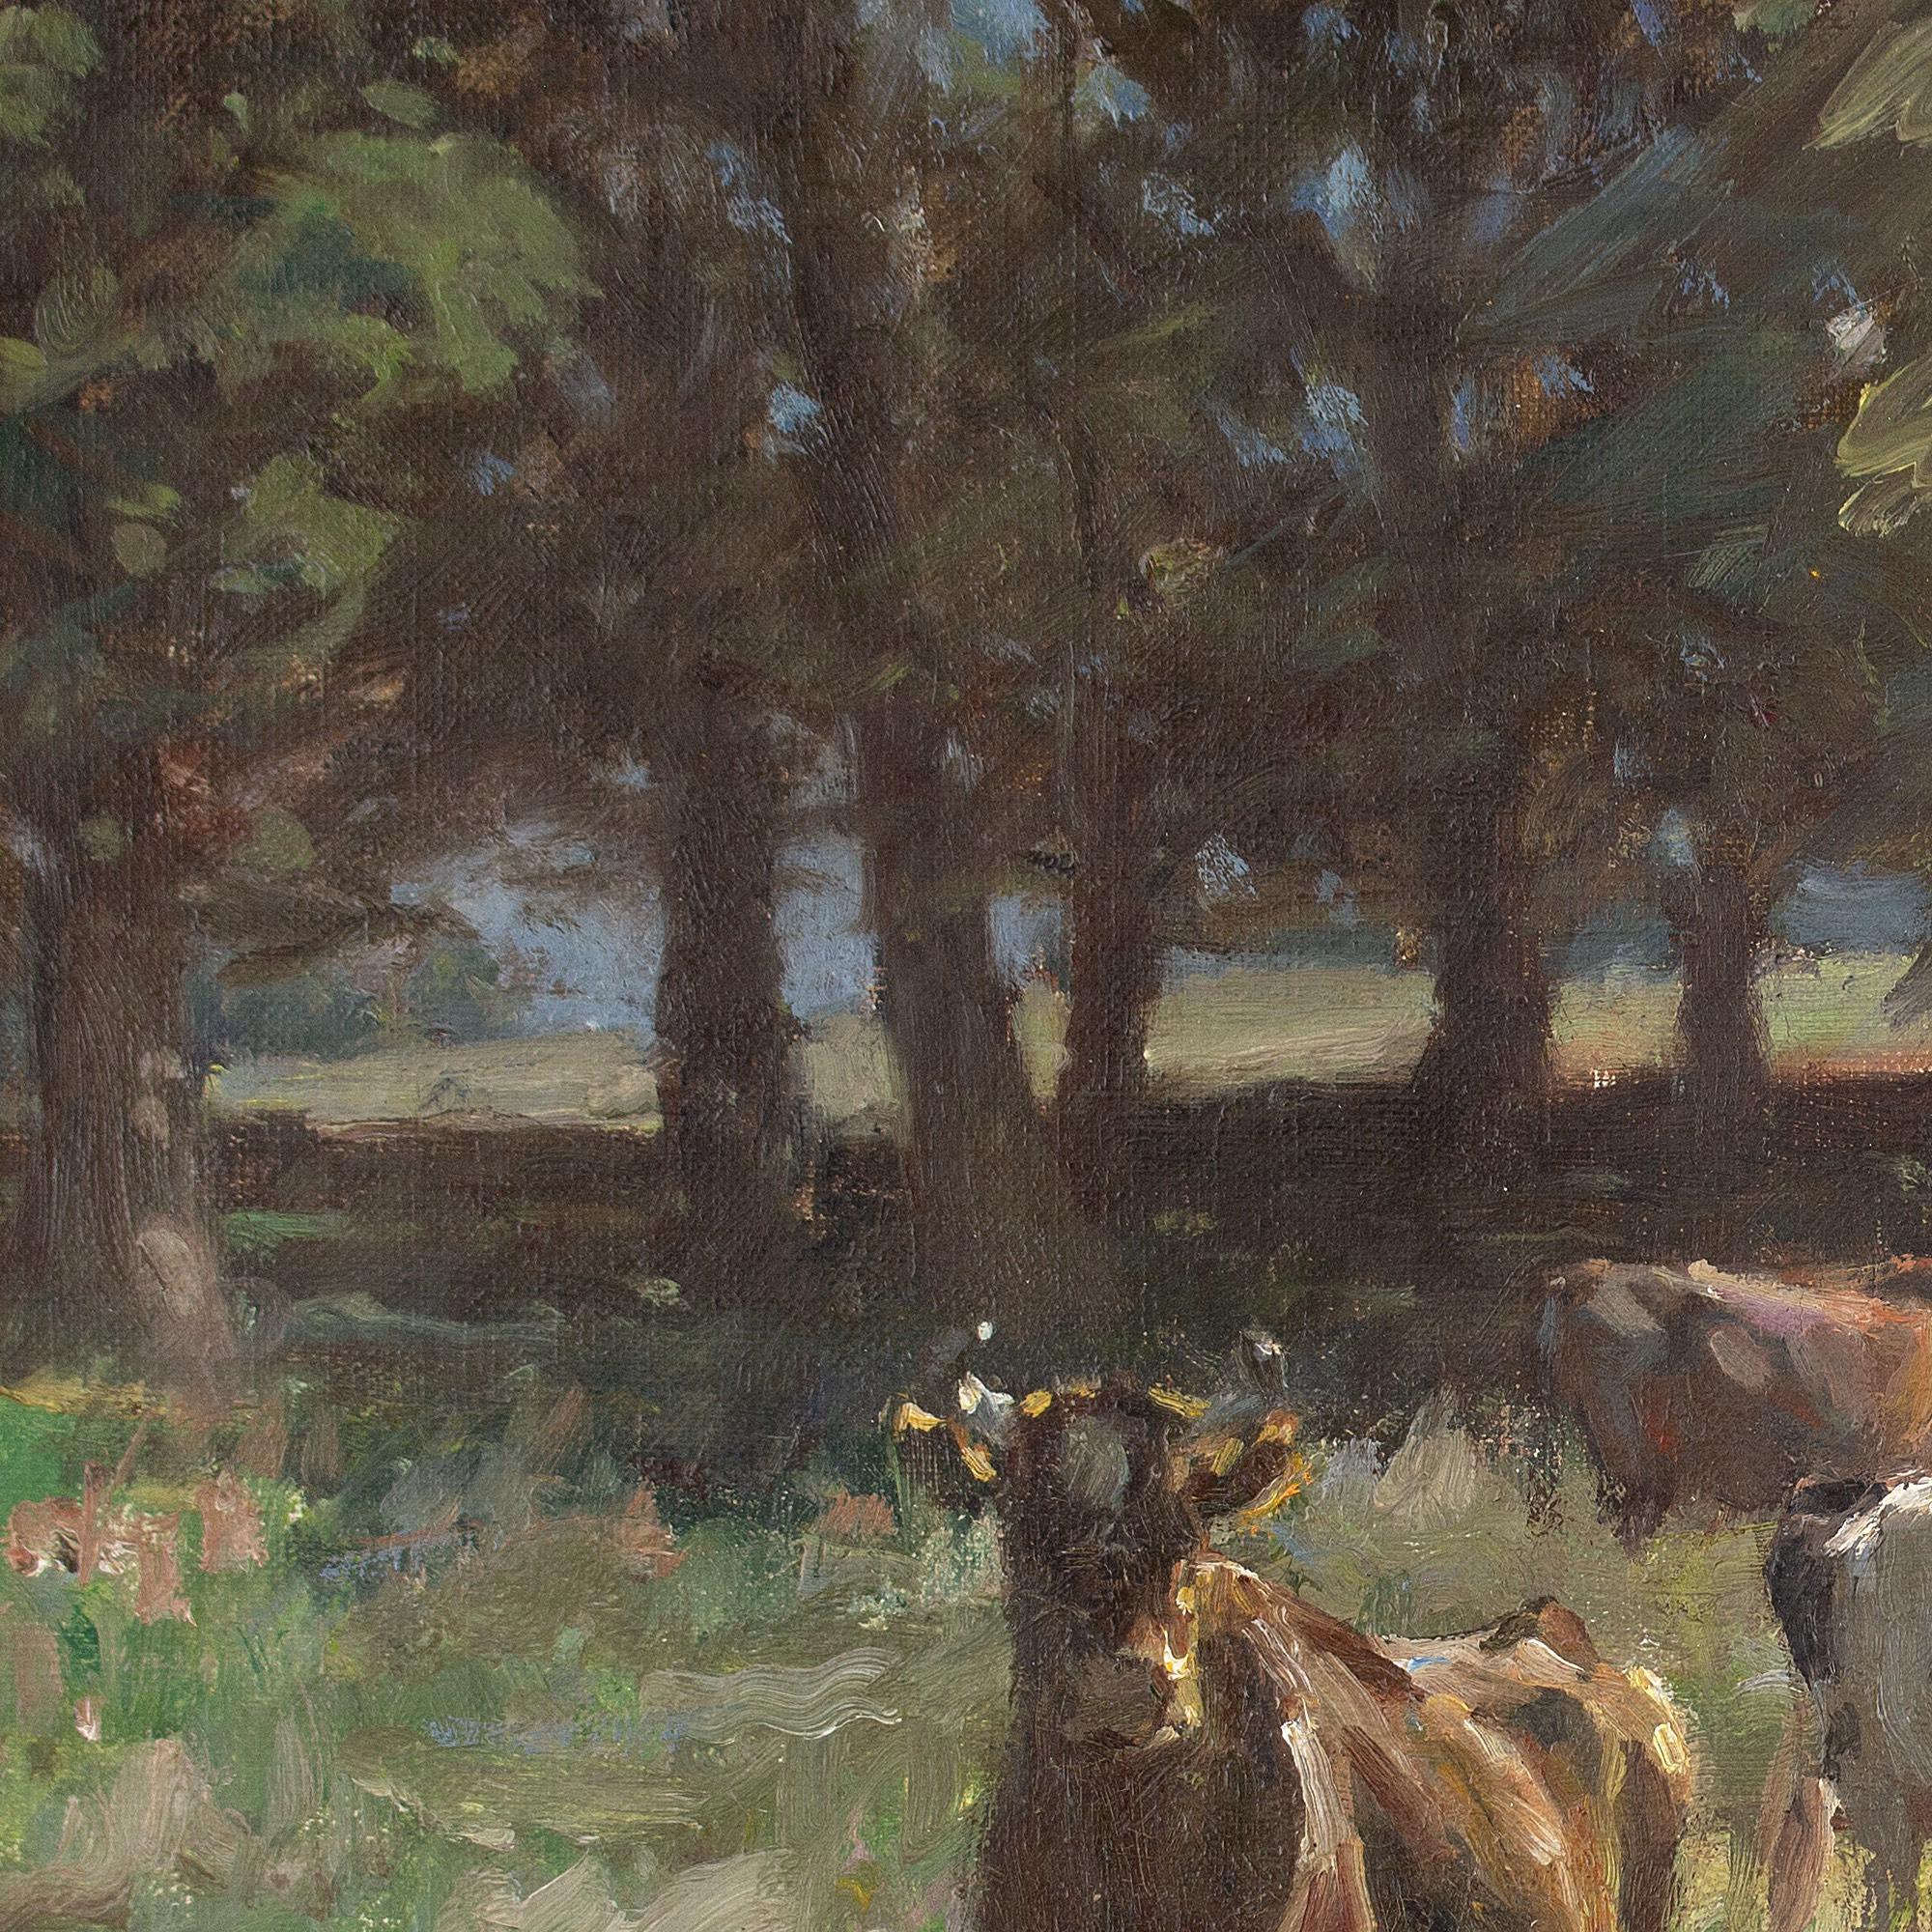 Michael Therkildsen, Pastoral Landscape With Cattle & Pond, Antique Oil Painting 5